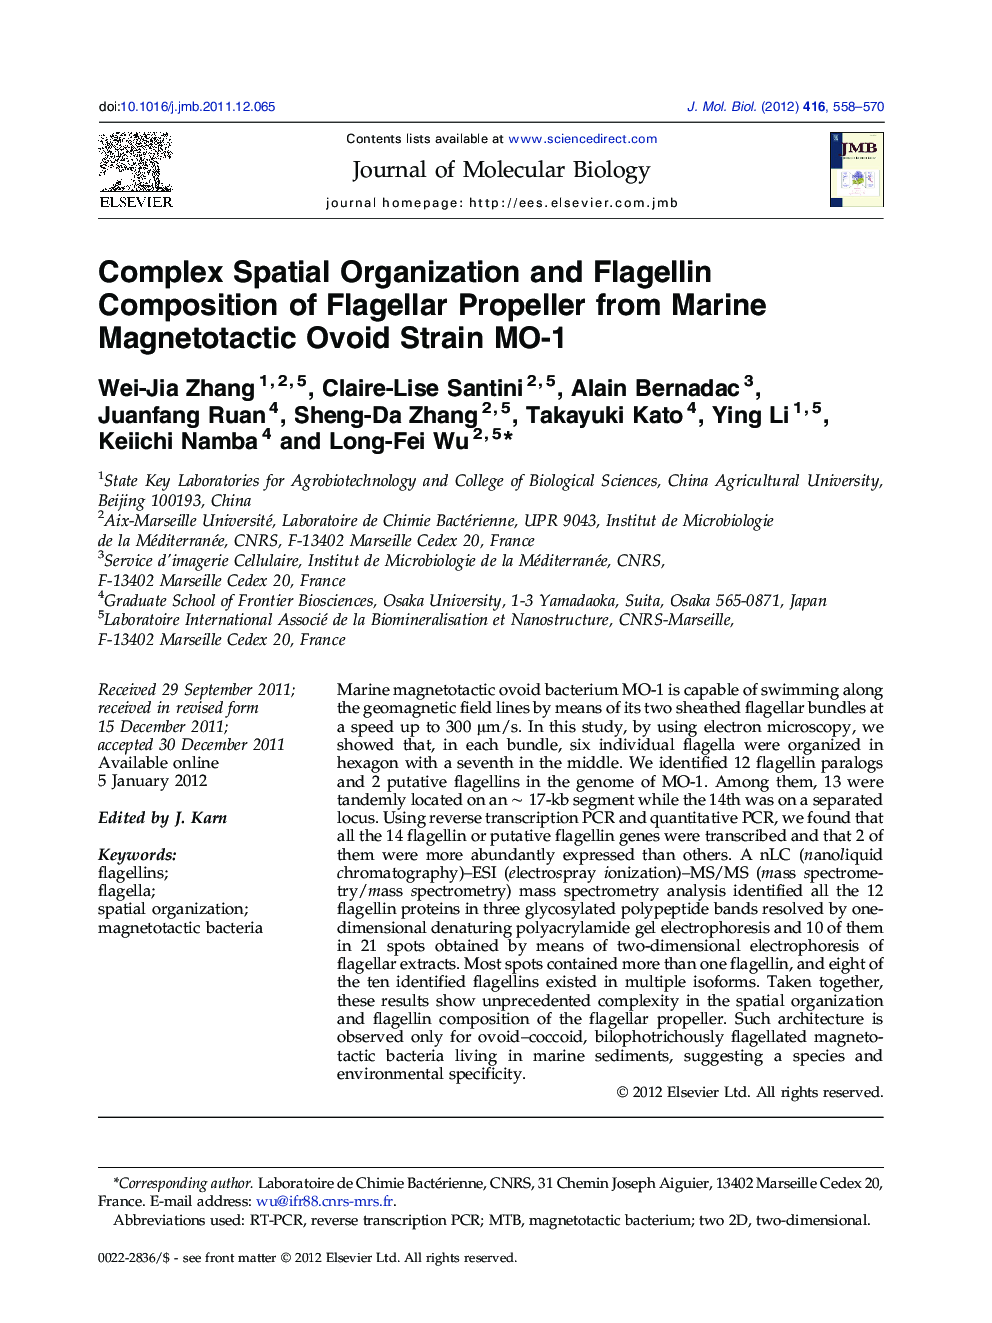 Complex Spatial Organization and Flagellin Composition of Flagellar Propeller from Marine Magnetotactic Ovoid Strain MO-1